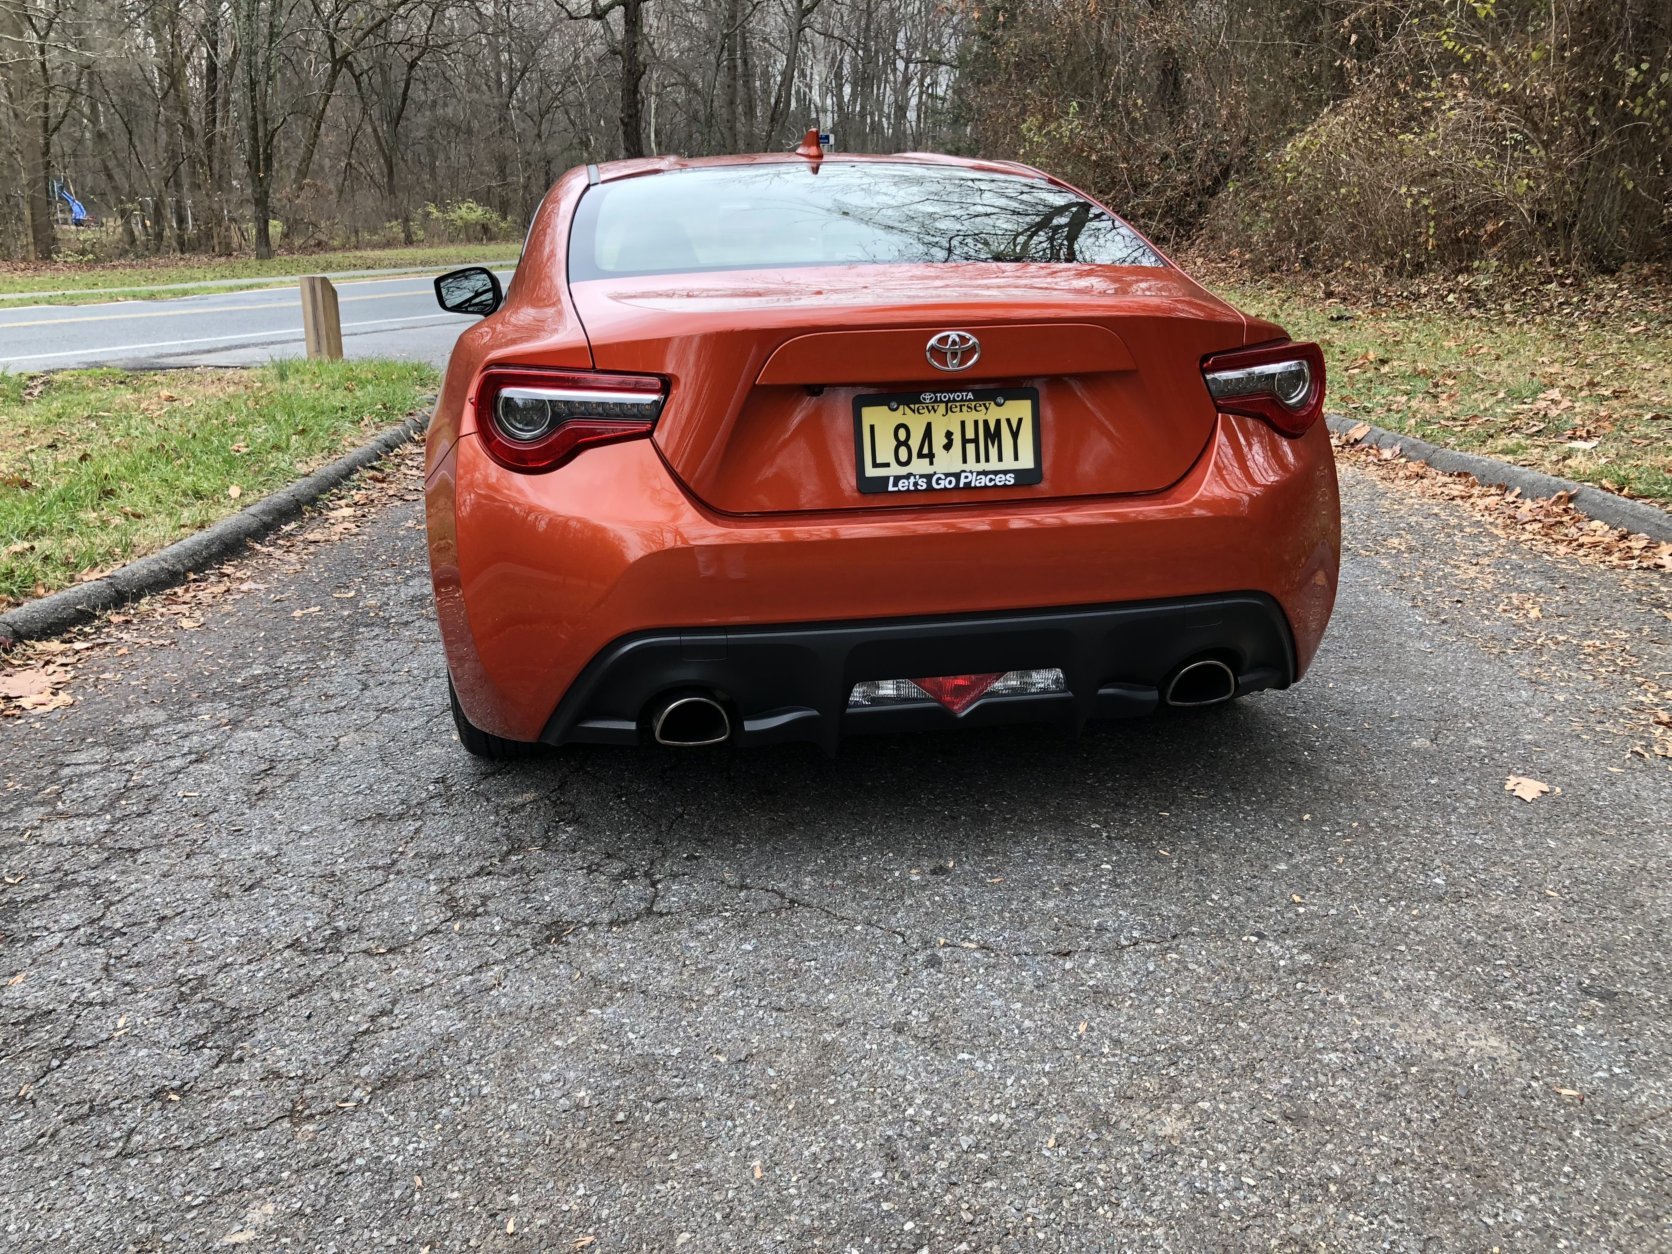 The Toyota 86 is a small coupe that gets back to the basics of what makes driving so much fun. It doesn’t work well as a family car, but it rewards drivers with good, honest handling and a spirited back road partner. (WTOP/Mike Parris)